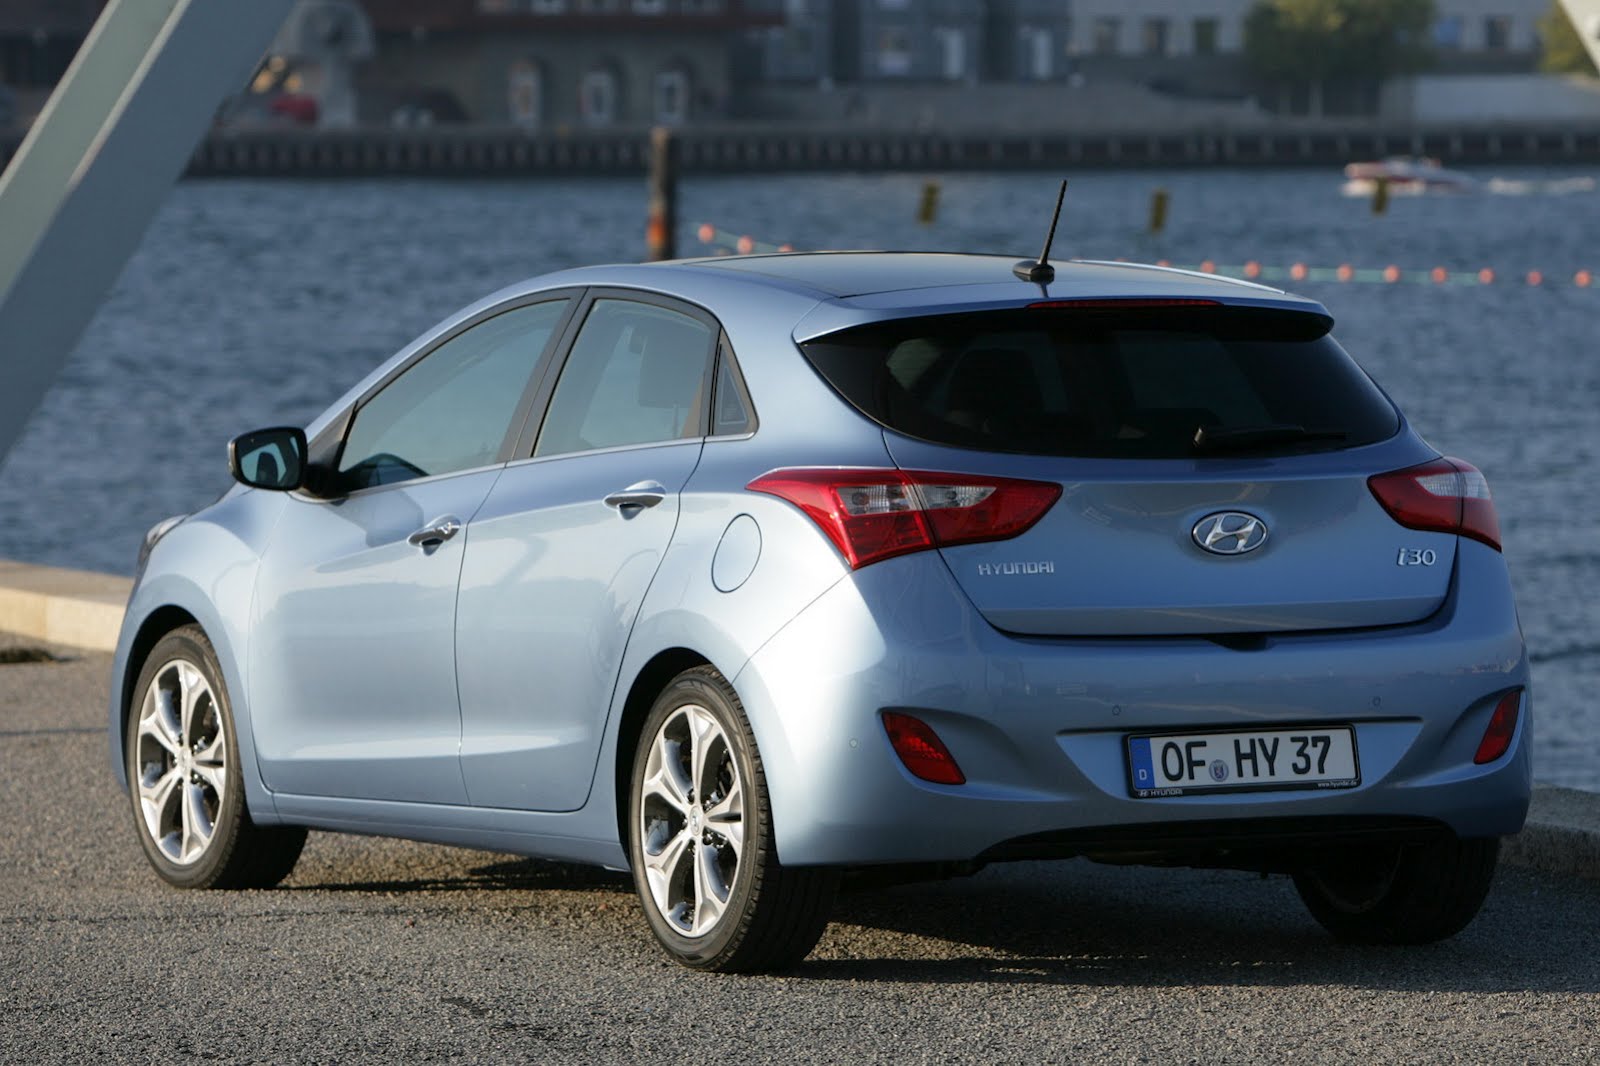 New Hyundai i30 hatchback gets its price tag for UK